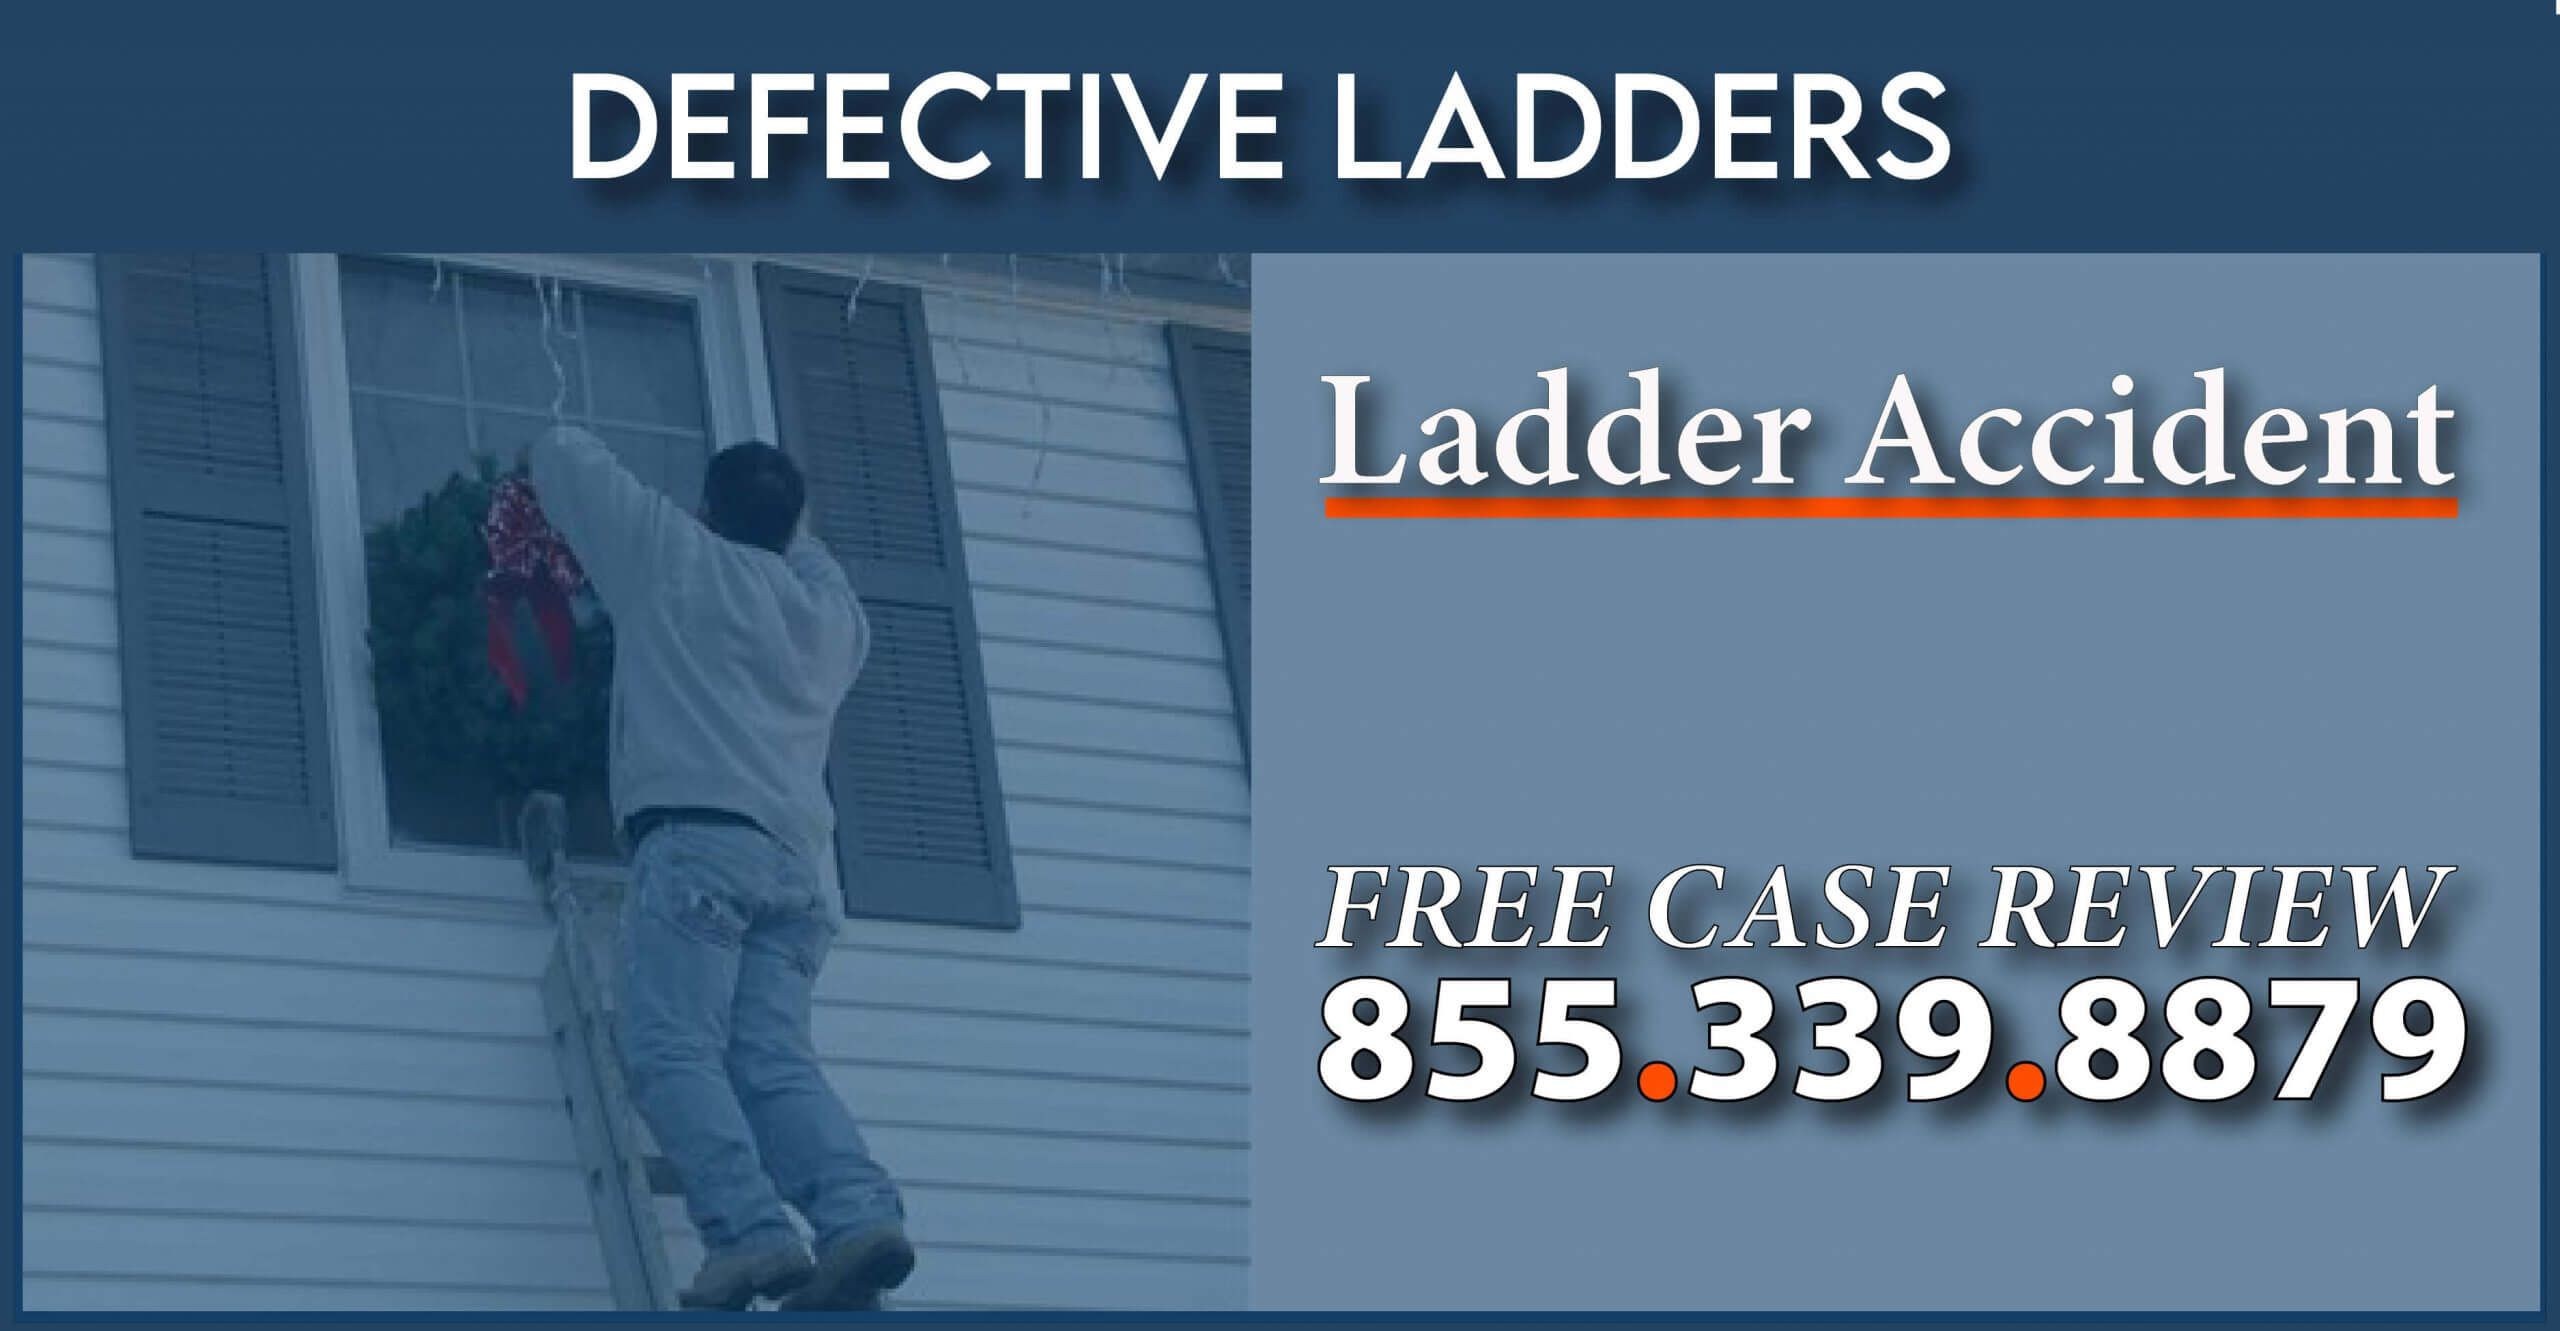 defective ladders lawyer product liability compensation injury accident incident medical expense